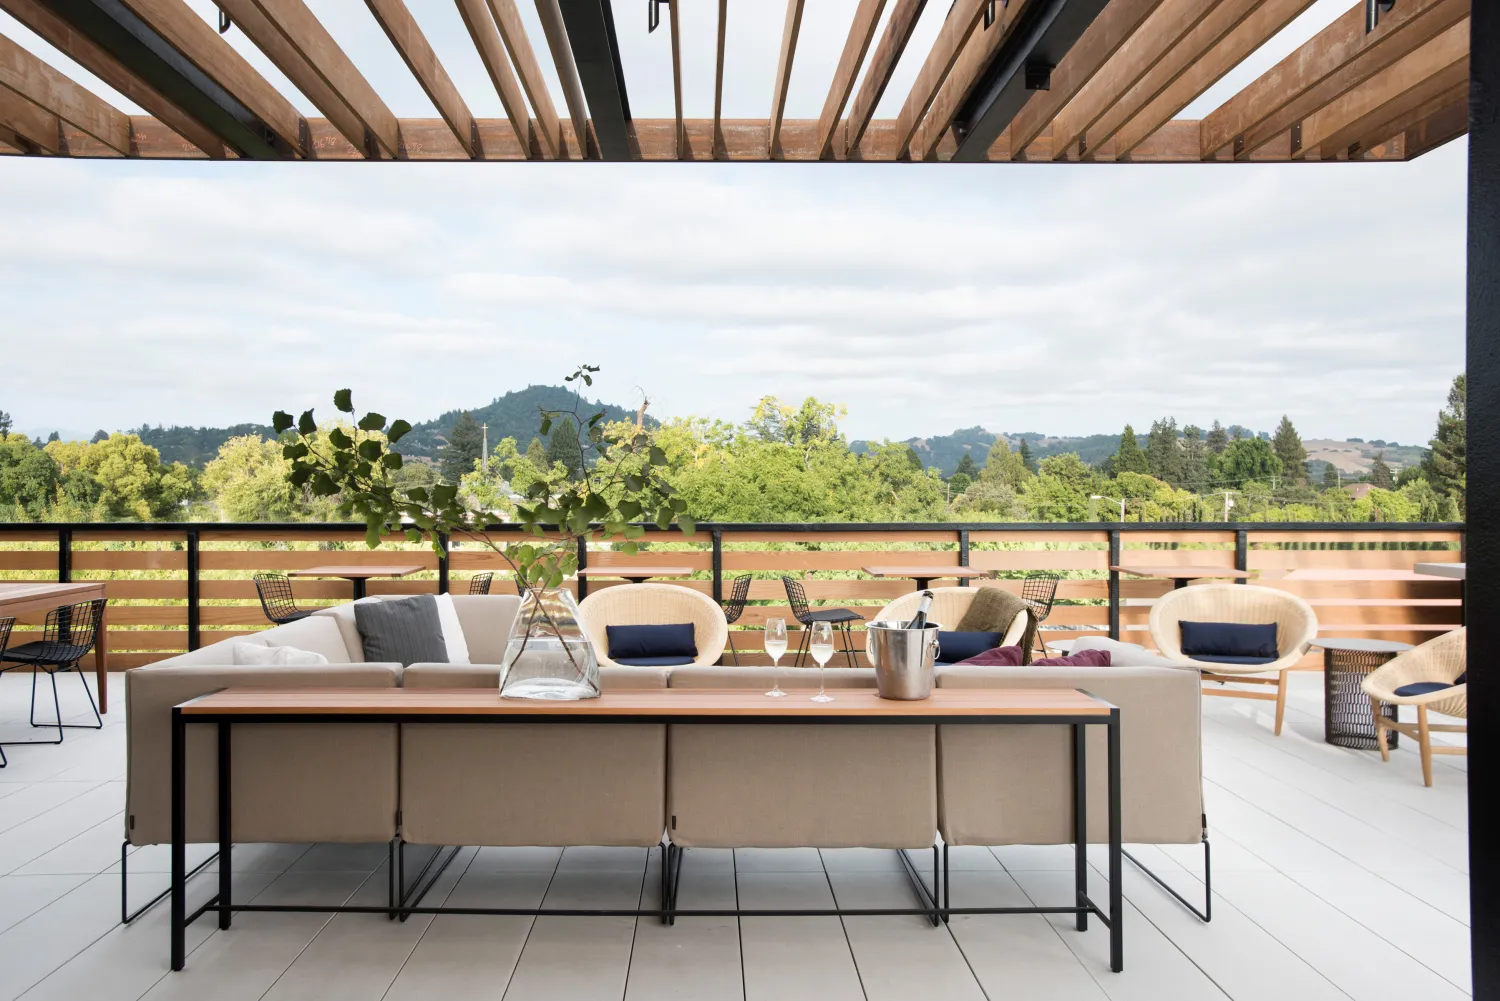 Rooftop terrace at Harmon Guest House over looking the Healdsburg mountains.